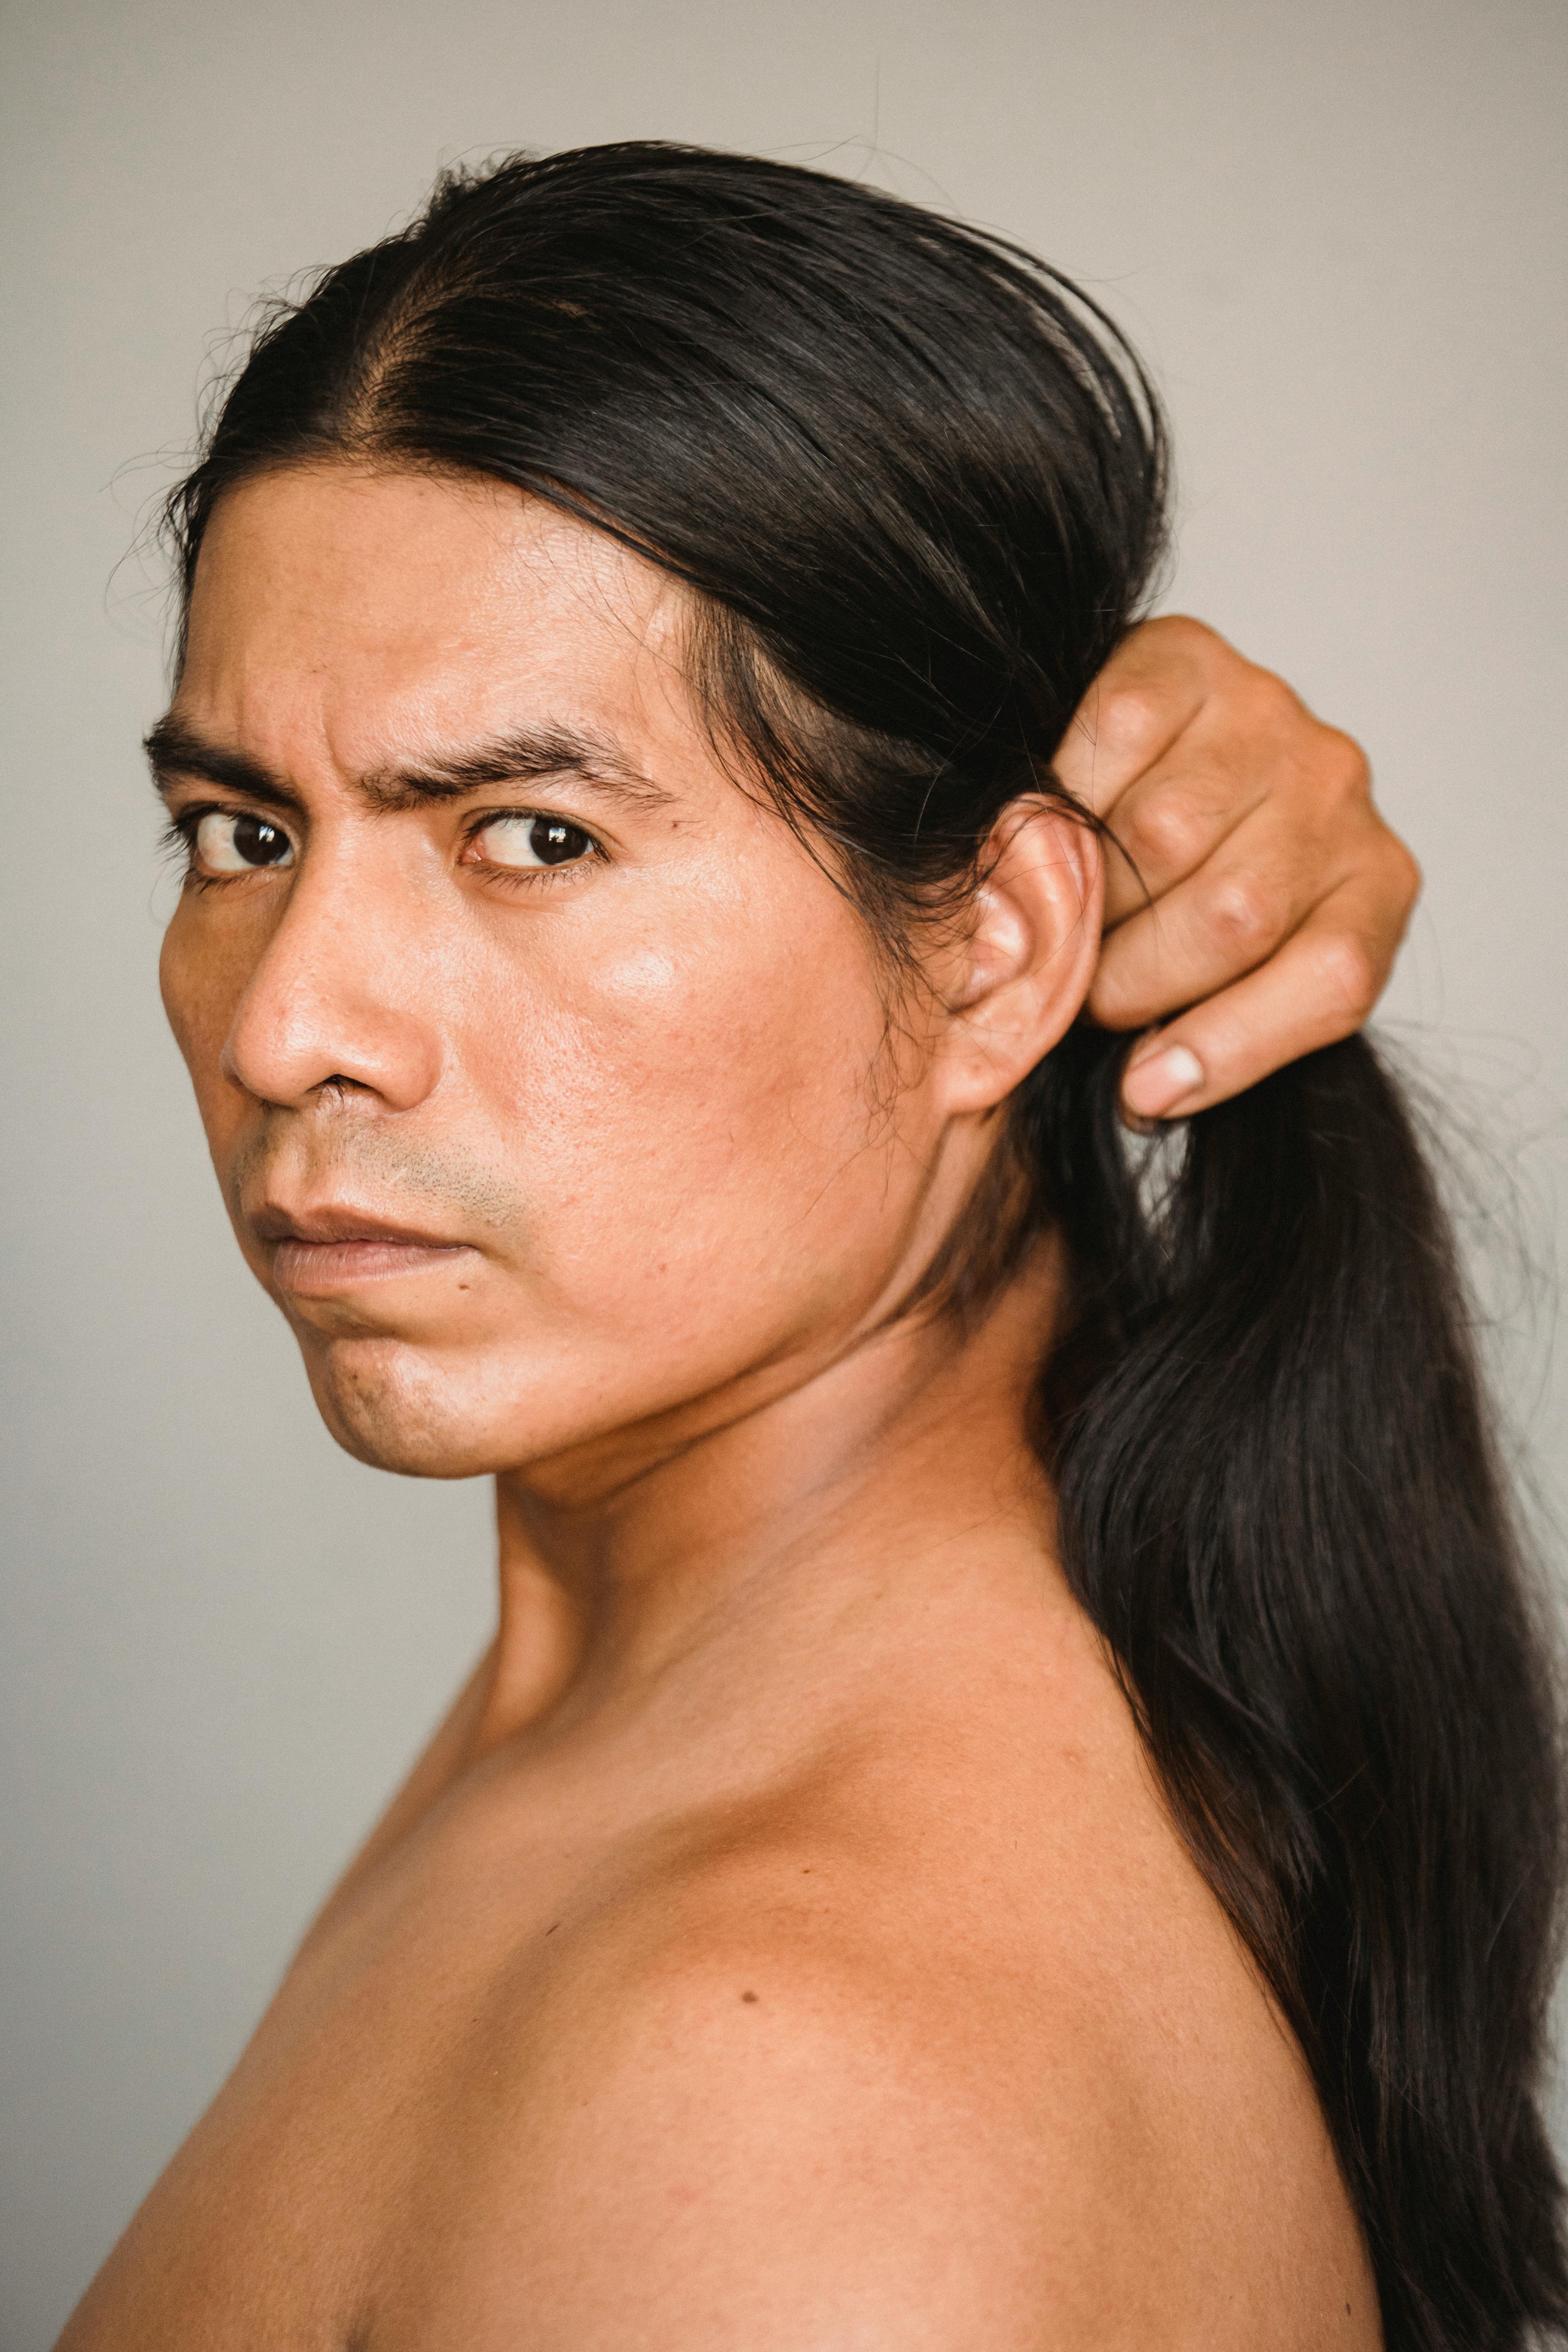 Skin American Indians Nude - American Indian man with naked torso Â· Free Stock Photo